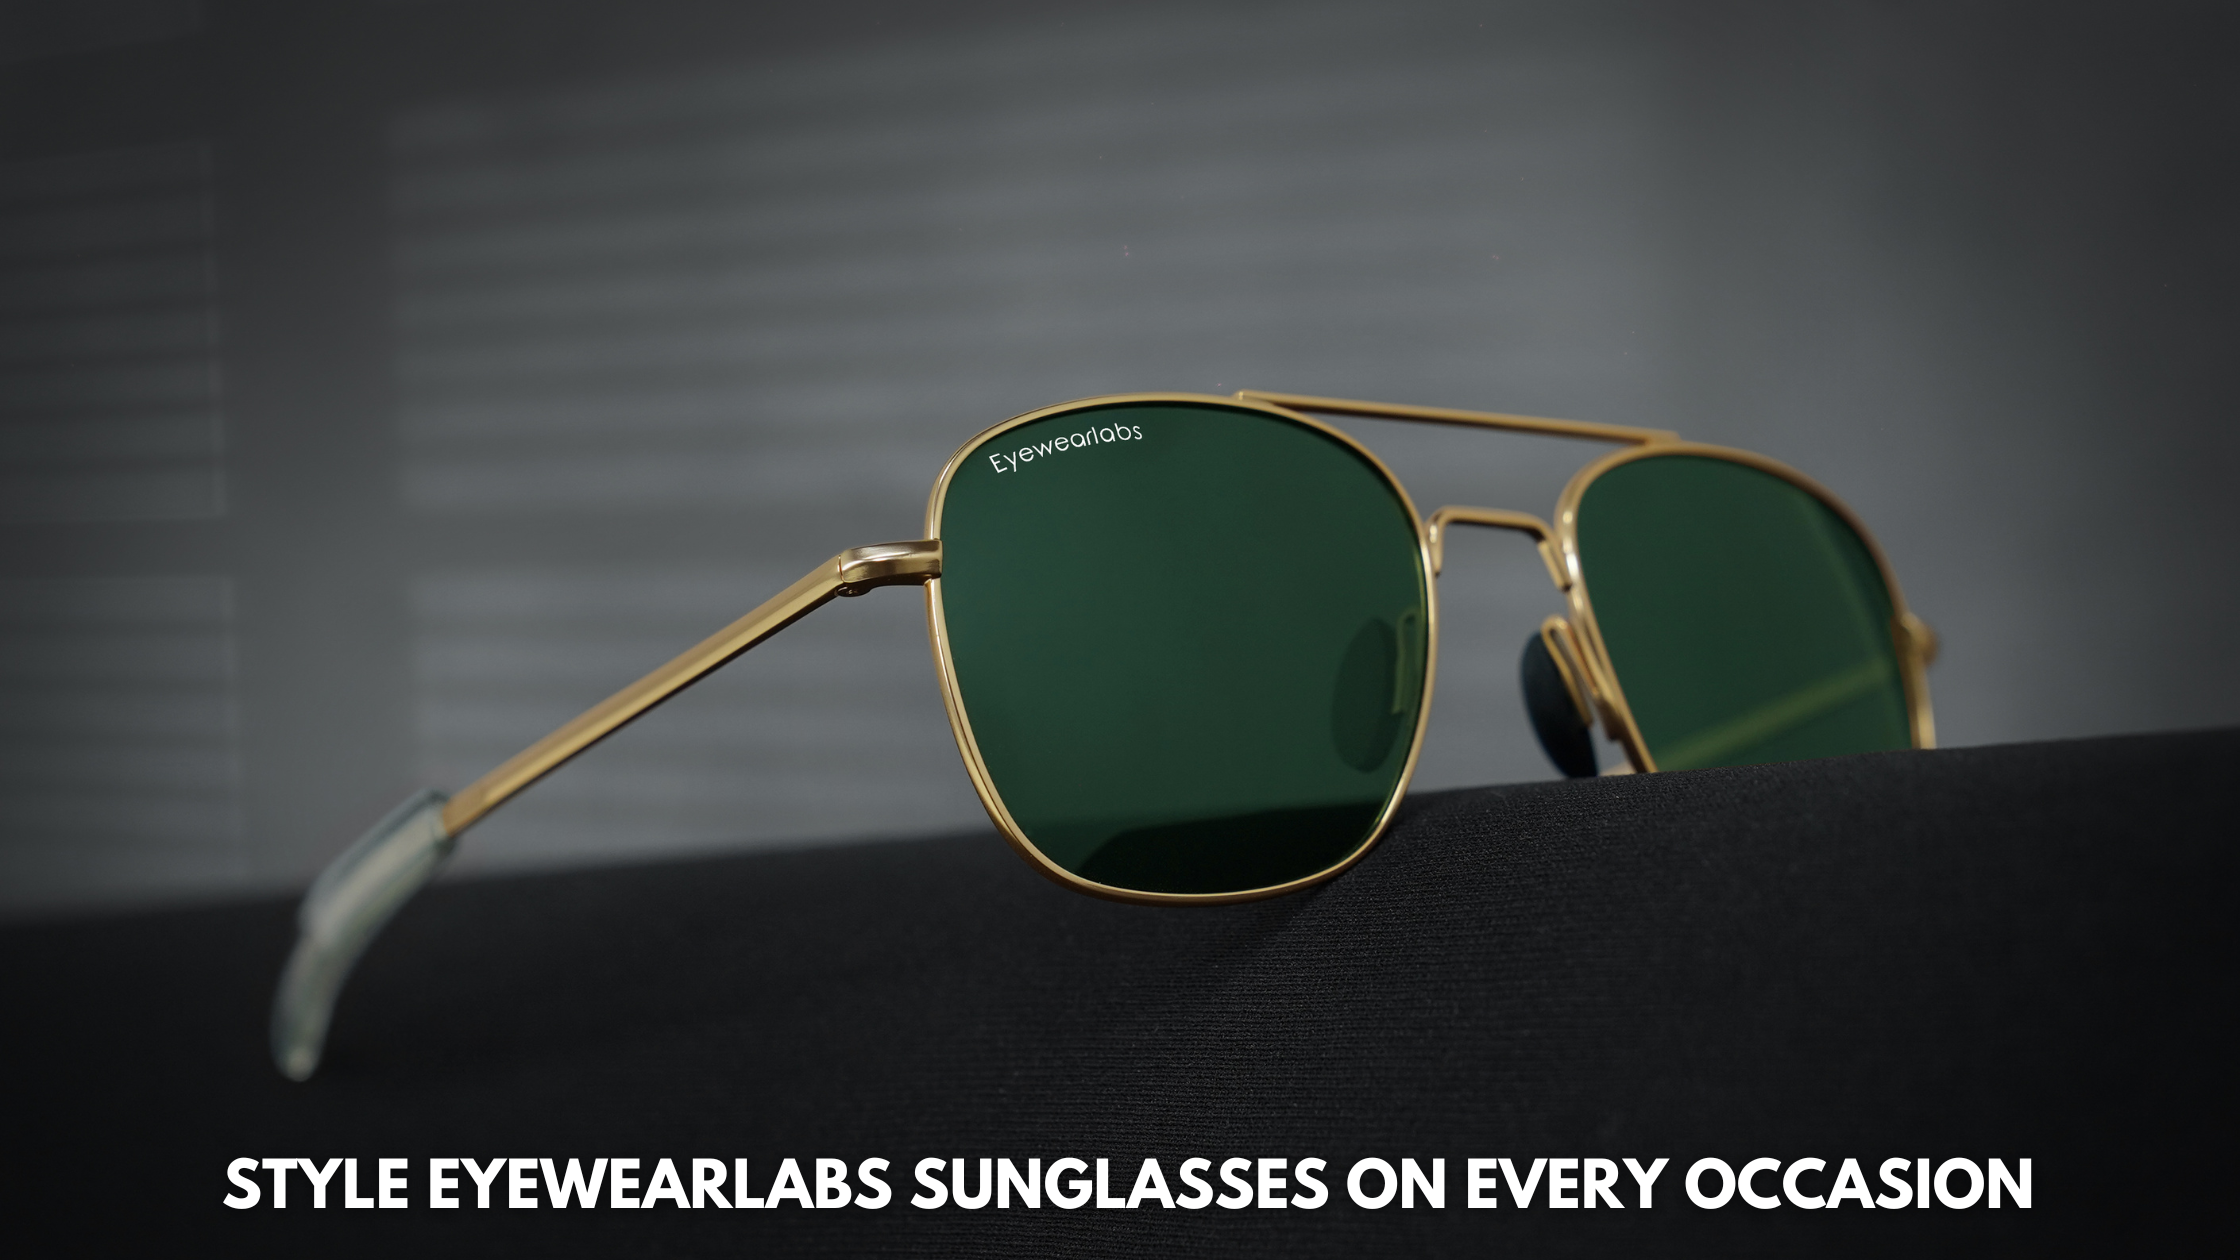 Style Eyewearlabs Sunglasses for Every Occasion